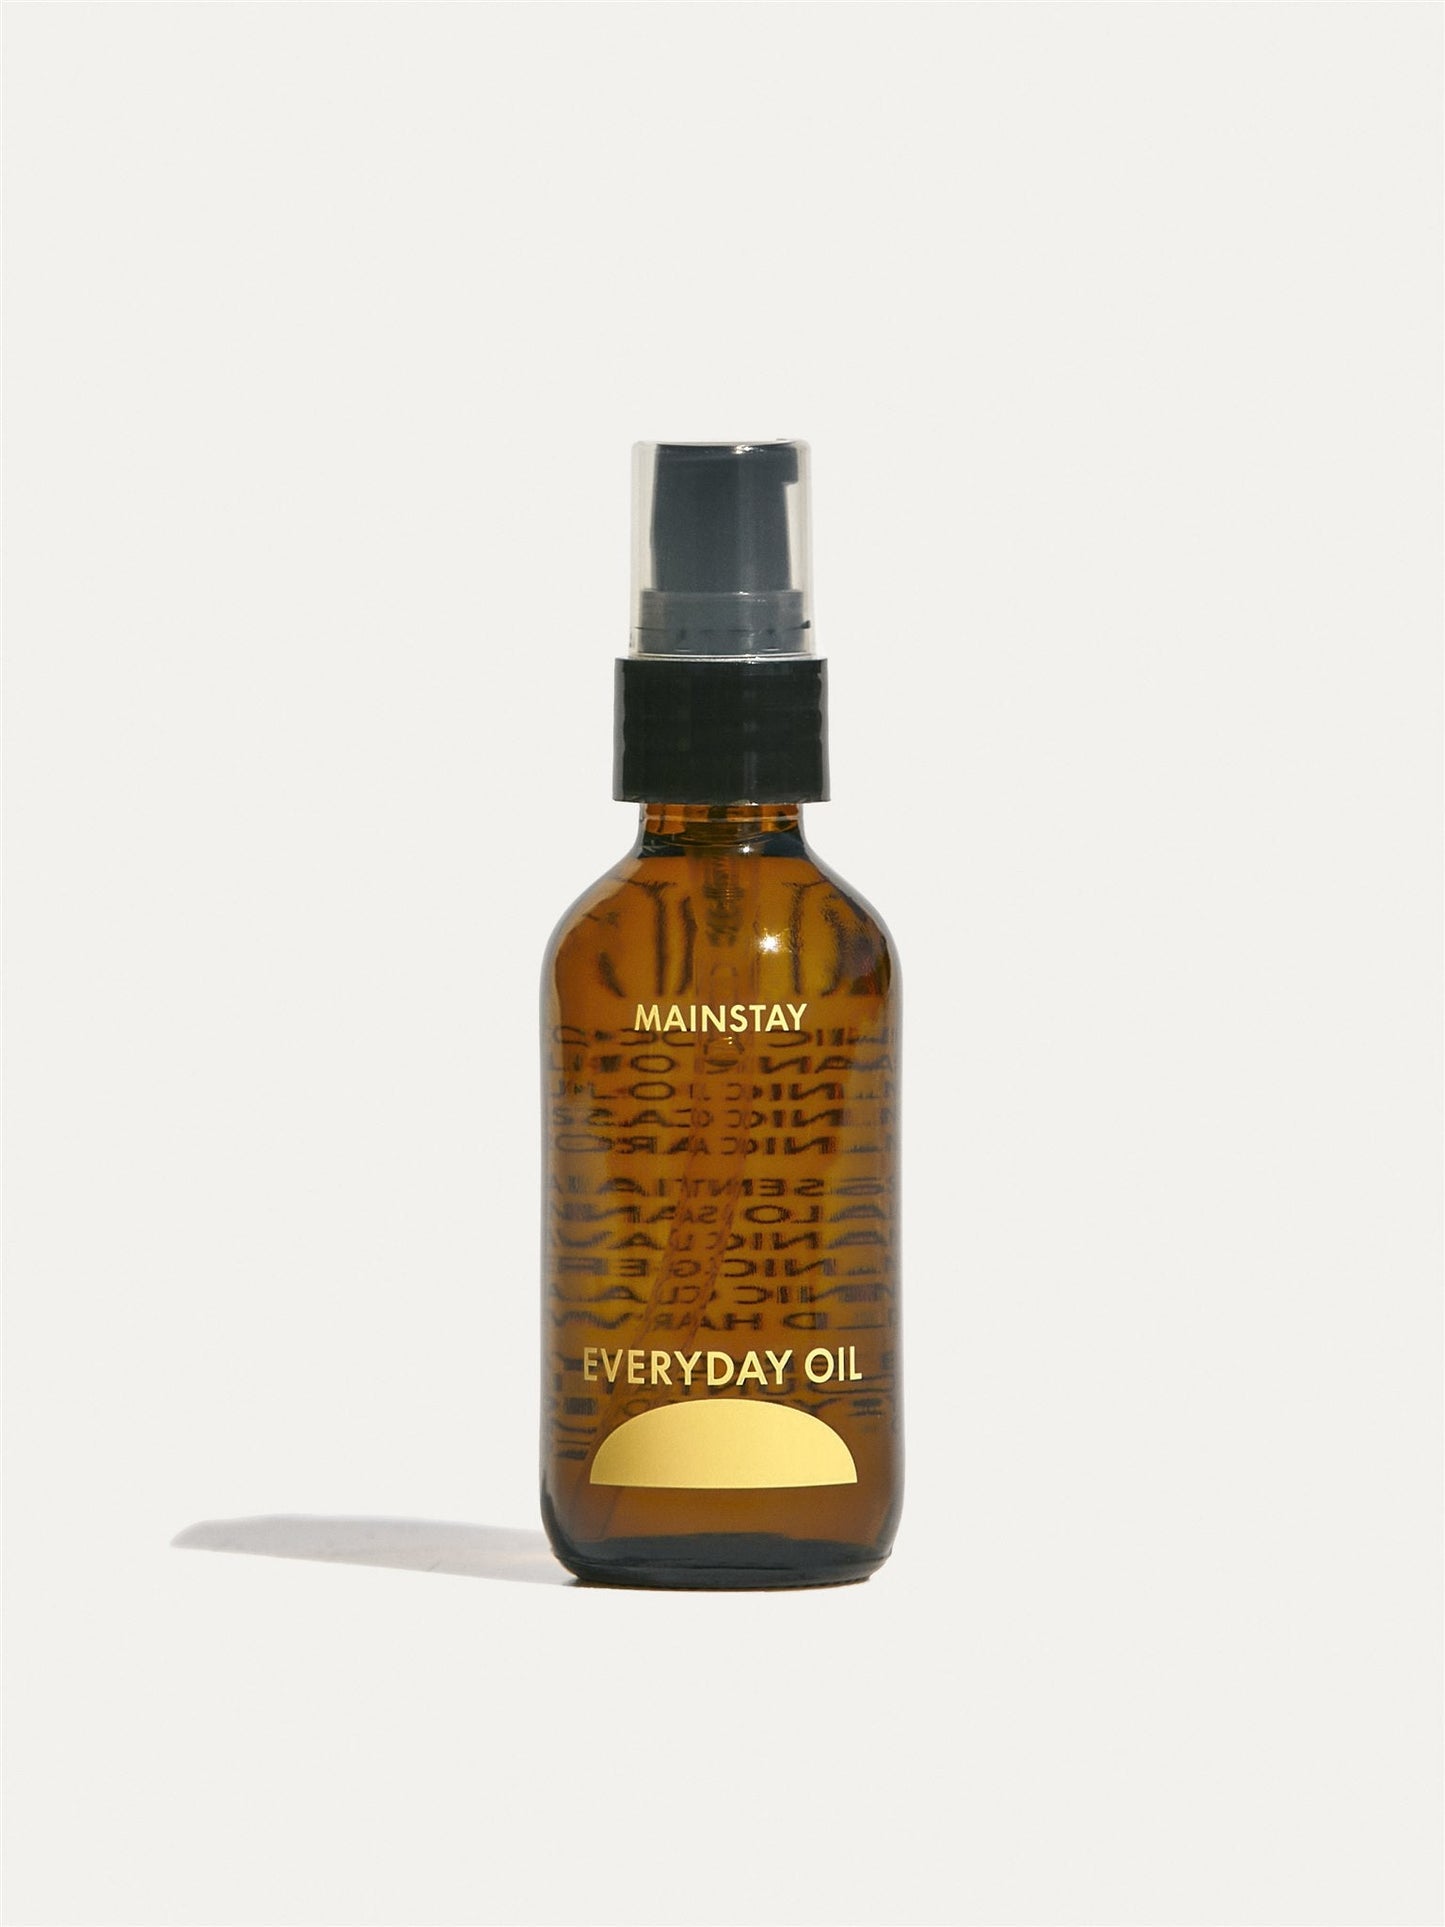 Everyday Oil in Mainstay. Certified organic and microbiome-friendly skincare for your whole body + whole family.  Organic and wild-harvested botanical oils that are balancing, hydrating, cleansing and nourishing for the face, body + hair. Uplifting yet calming, Mainstay will leave a signature scent on your skin all day long.